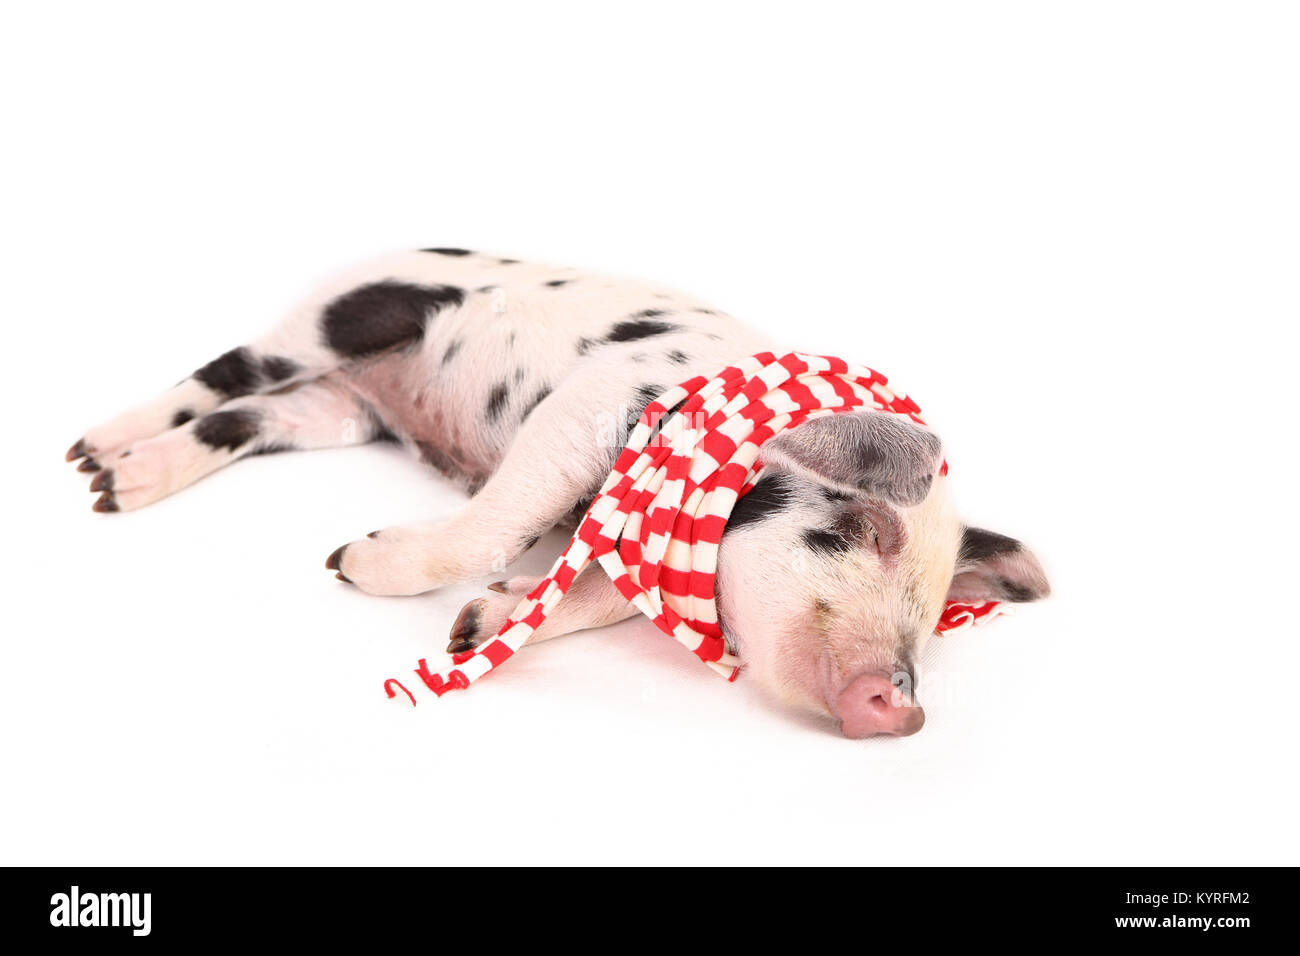 Domestic Pig, Turopolje x ?. Piglet (3 weeks old) sleeping, wearing a red-and-white scarf. Studio picture seen against a white background. Germany Stock Photo